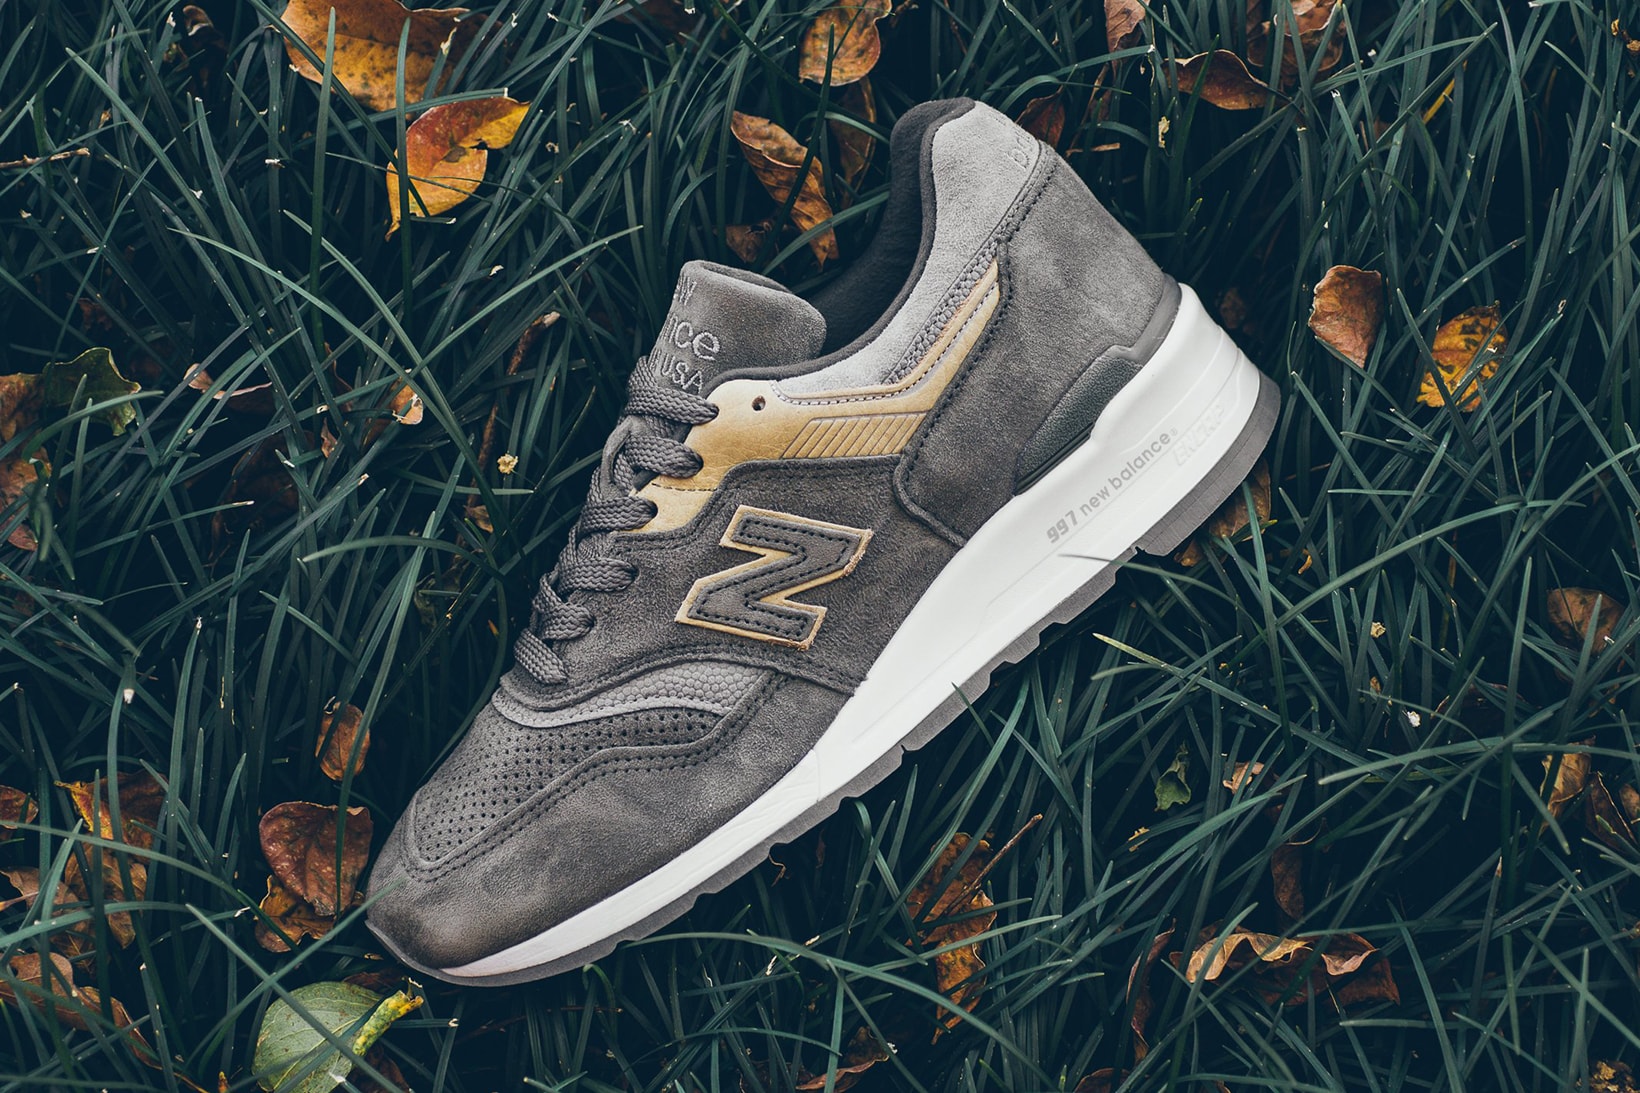 New Balance M997FGG Grey Tan Suede Leather USA Made Sneakers Shoes Footwear 2017 September Release Date Info Politics